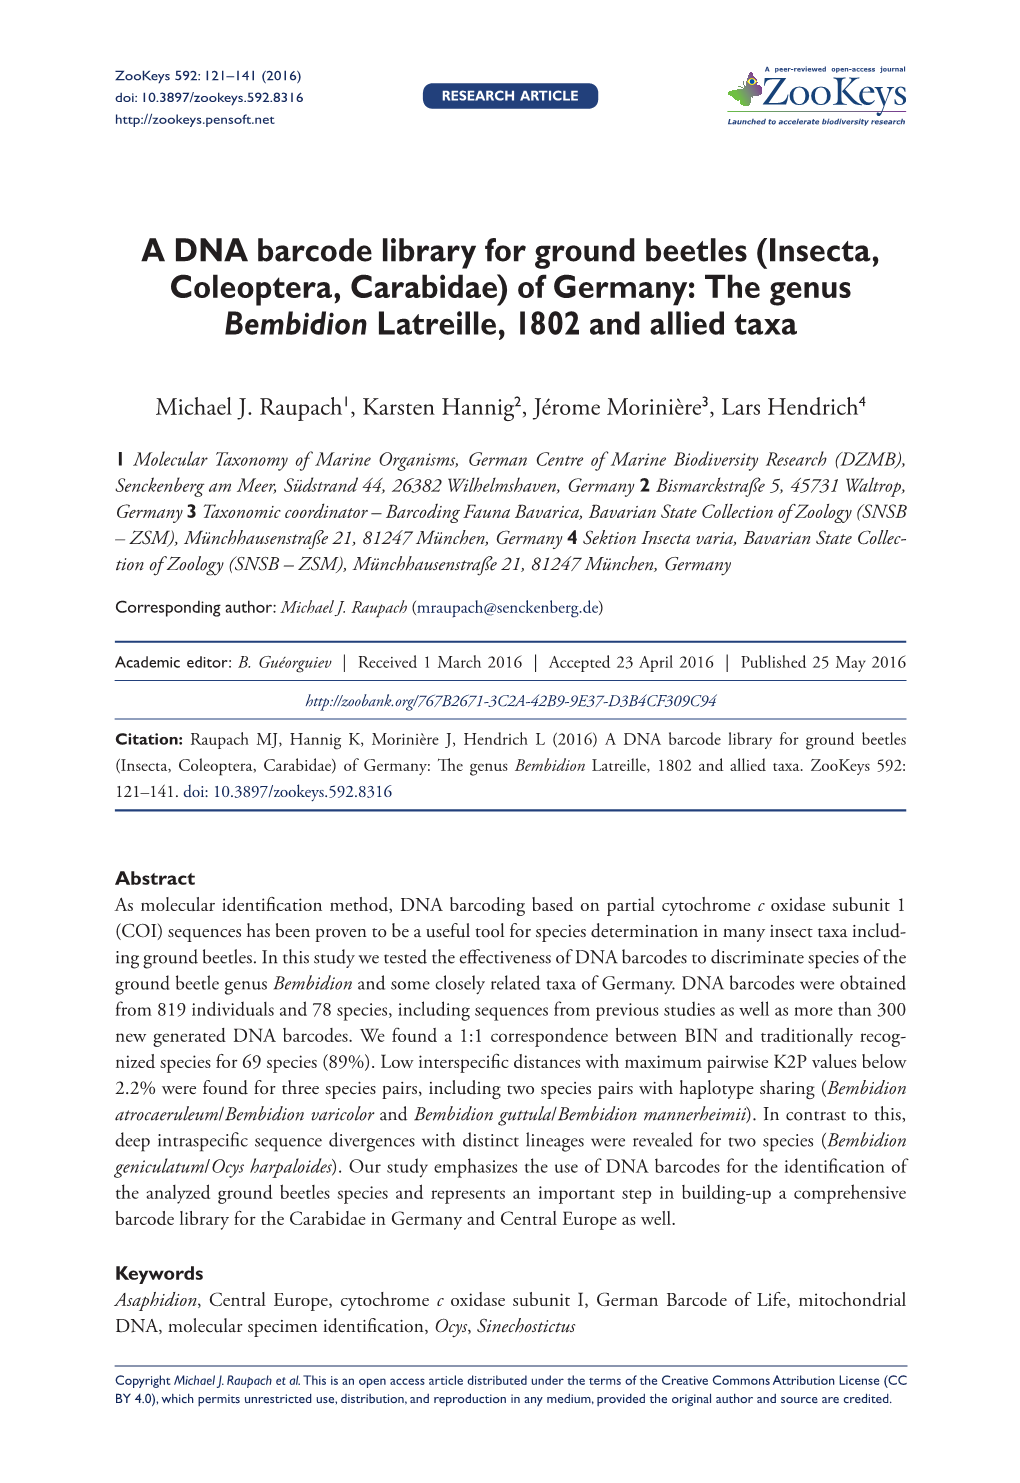 A DNA Barcode Library for Ground Beetles (Insecta, Coleoptera, Carabidae) of Germany: the Genus Bembidion Latreille, 1802 and Allied Taxa